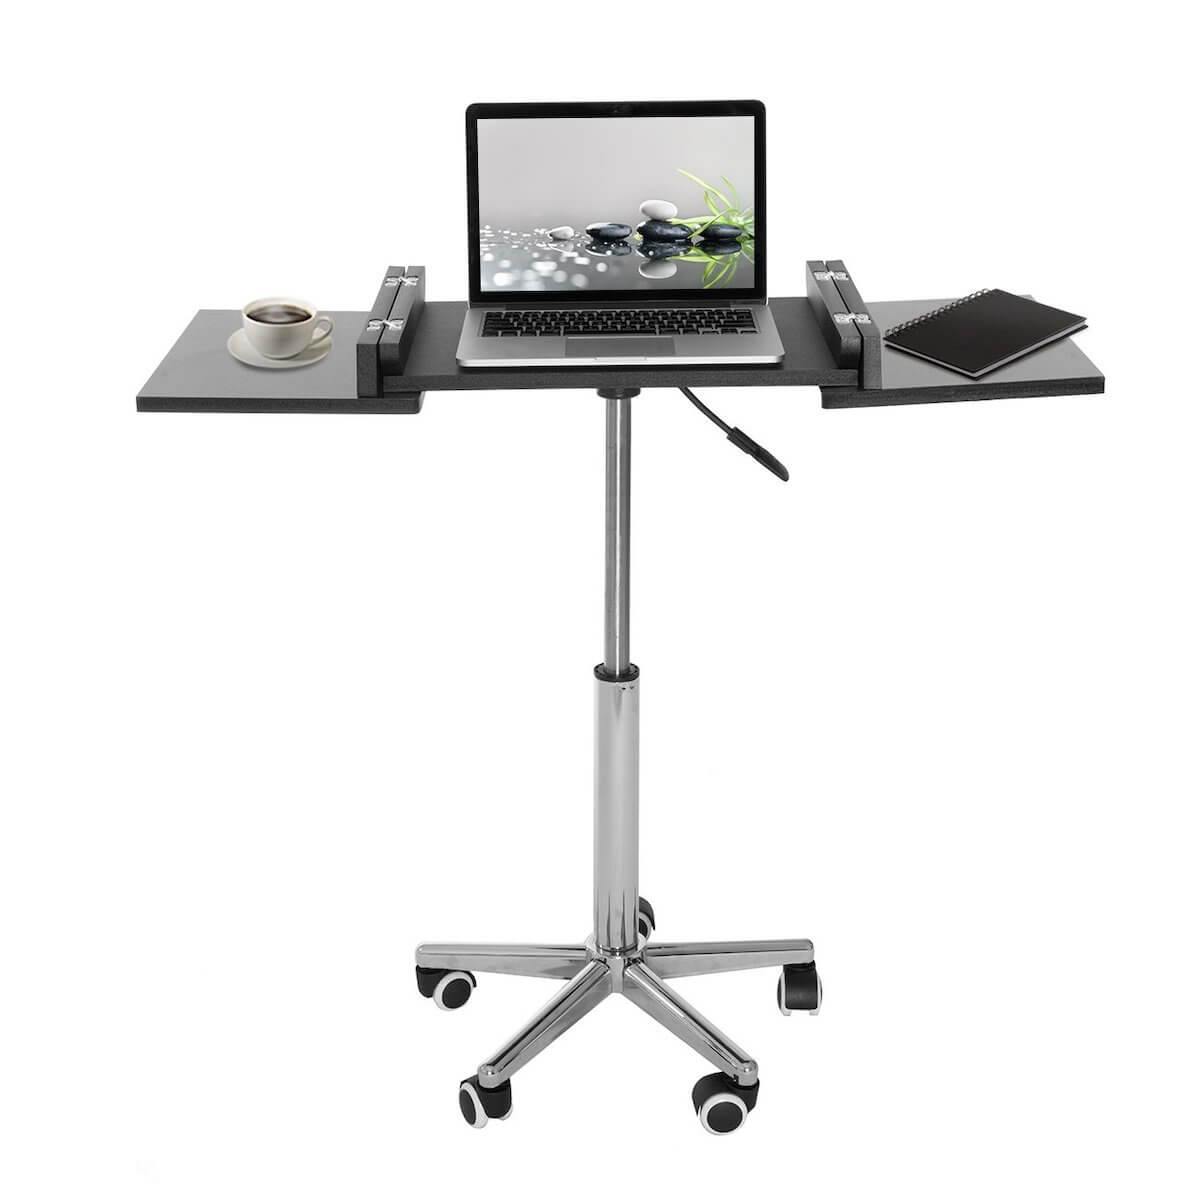 Techni Mobili Graphite Folding Table Laptop Cart RTA-B006-GPH06 Expanded with Computer